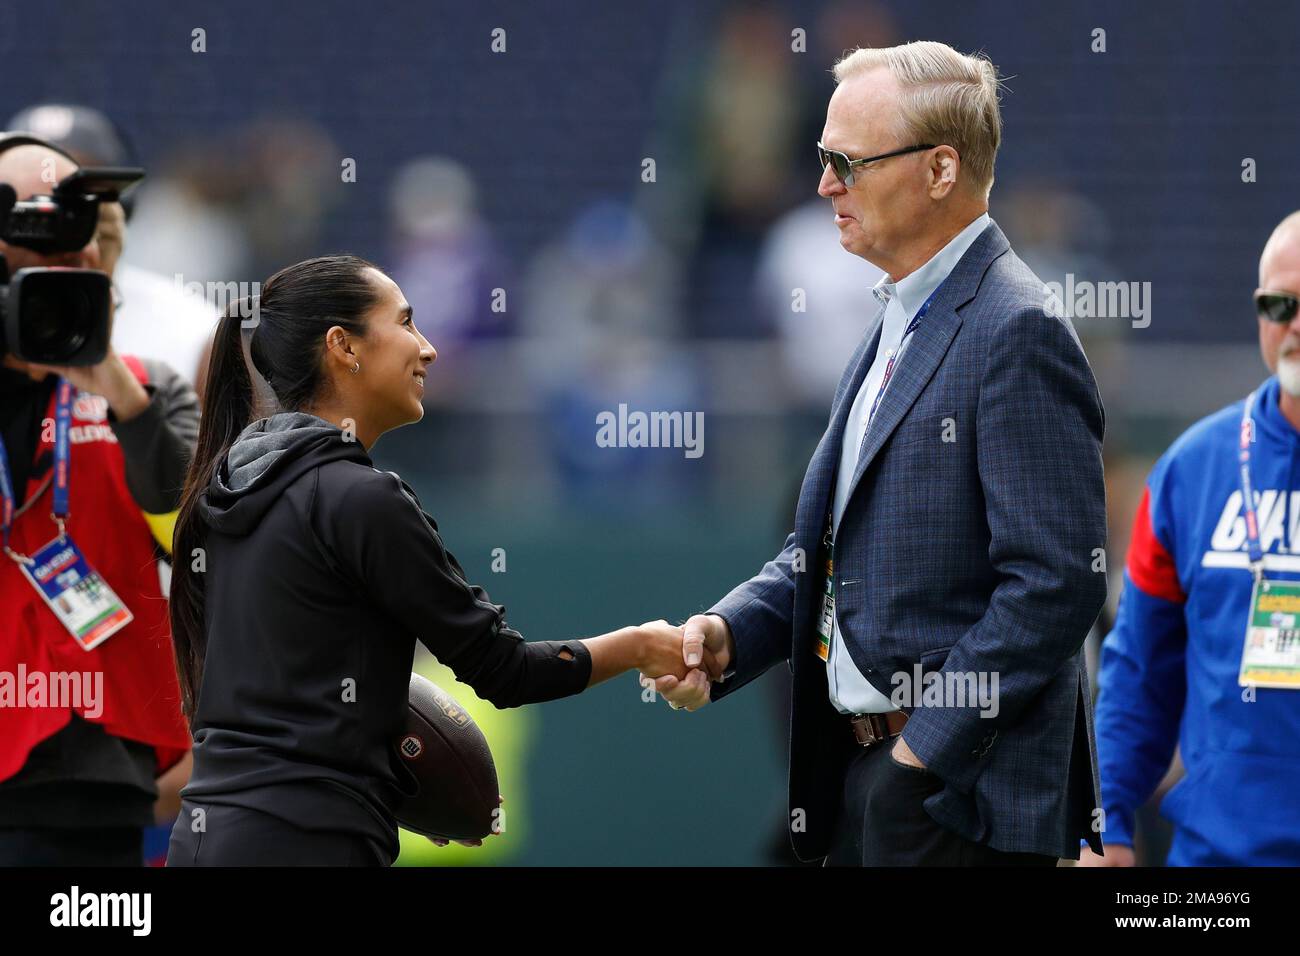 Team Mexico Women's Flag quarterback Diana Flores greets New York Giants  president, CEO, and co-owner John Mara before an NFL football game between  the Green Bay Packers and the New York Giants